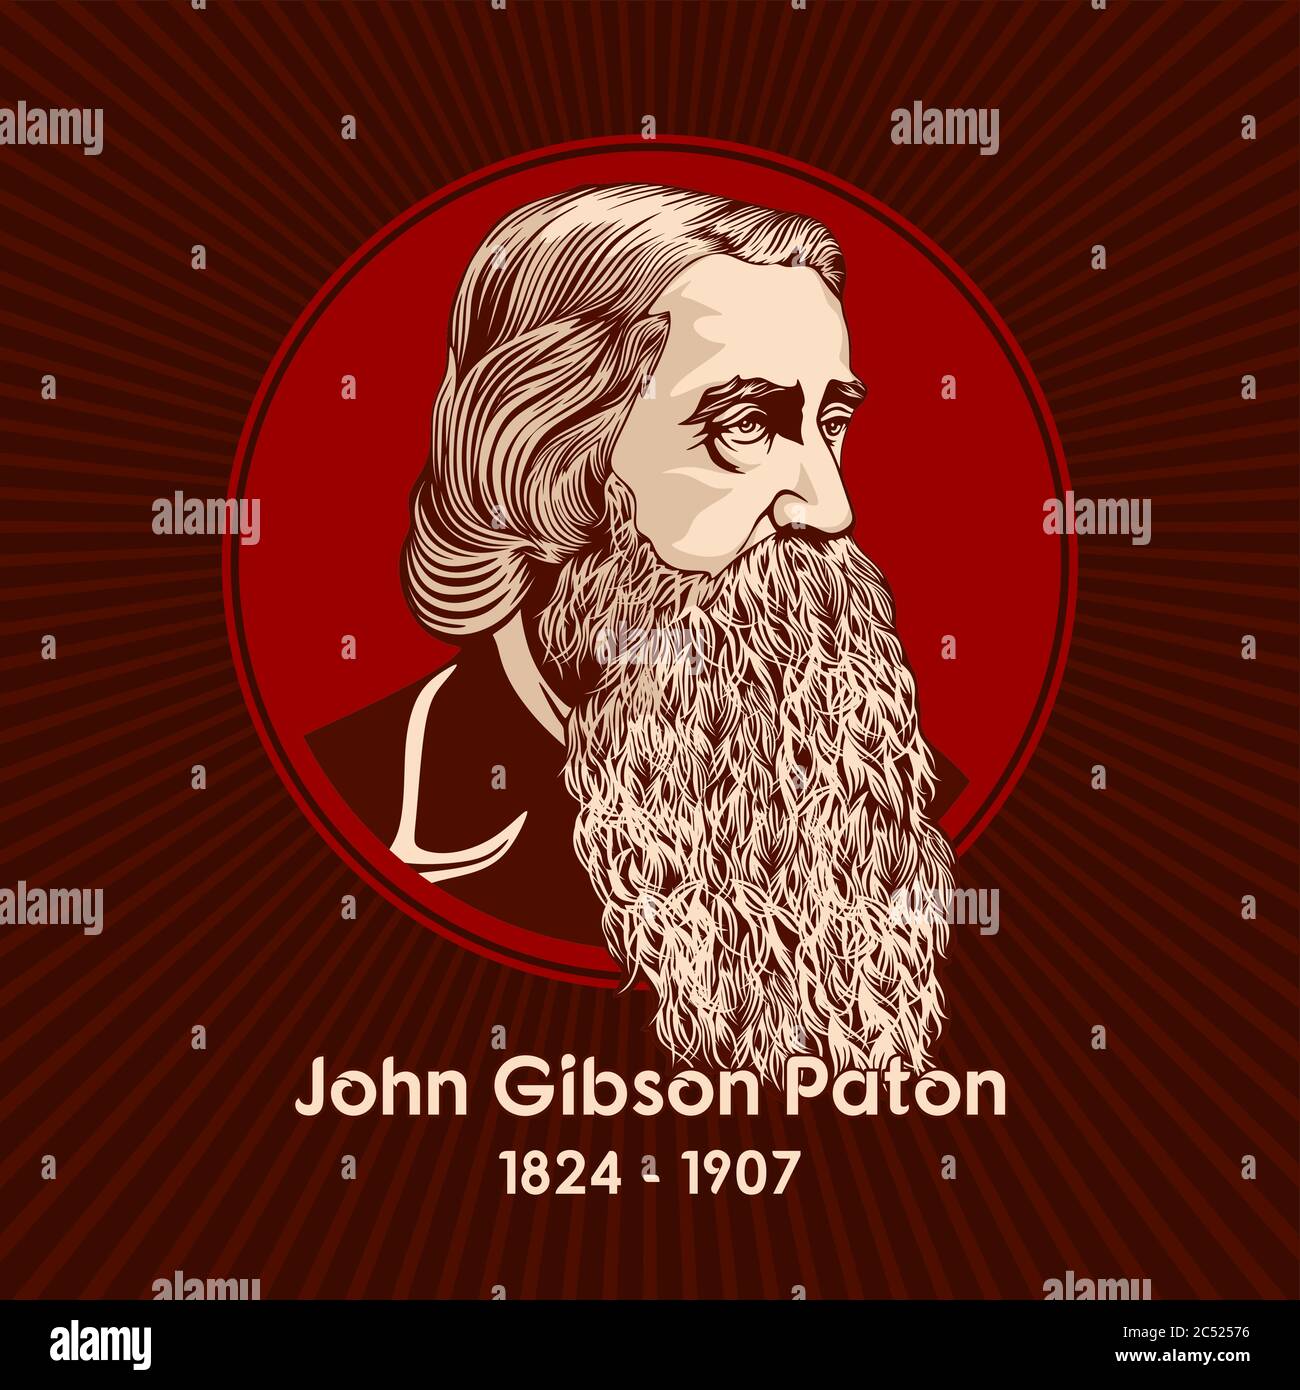 John Gibson Paton (1824 - 1907), born in Scotland, was a Protestant missionary to the New Hebrides Islands of the South Pacific. Stock Vector